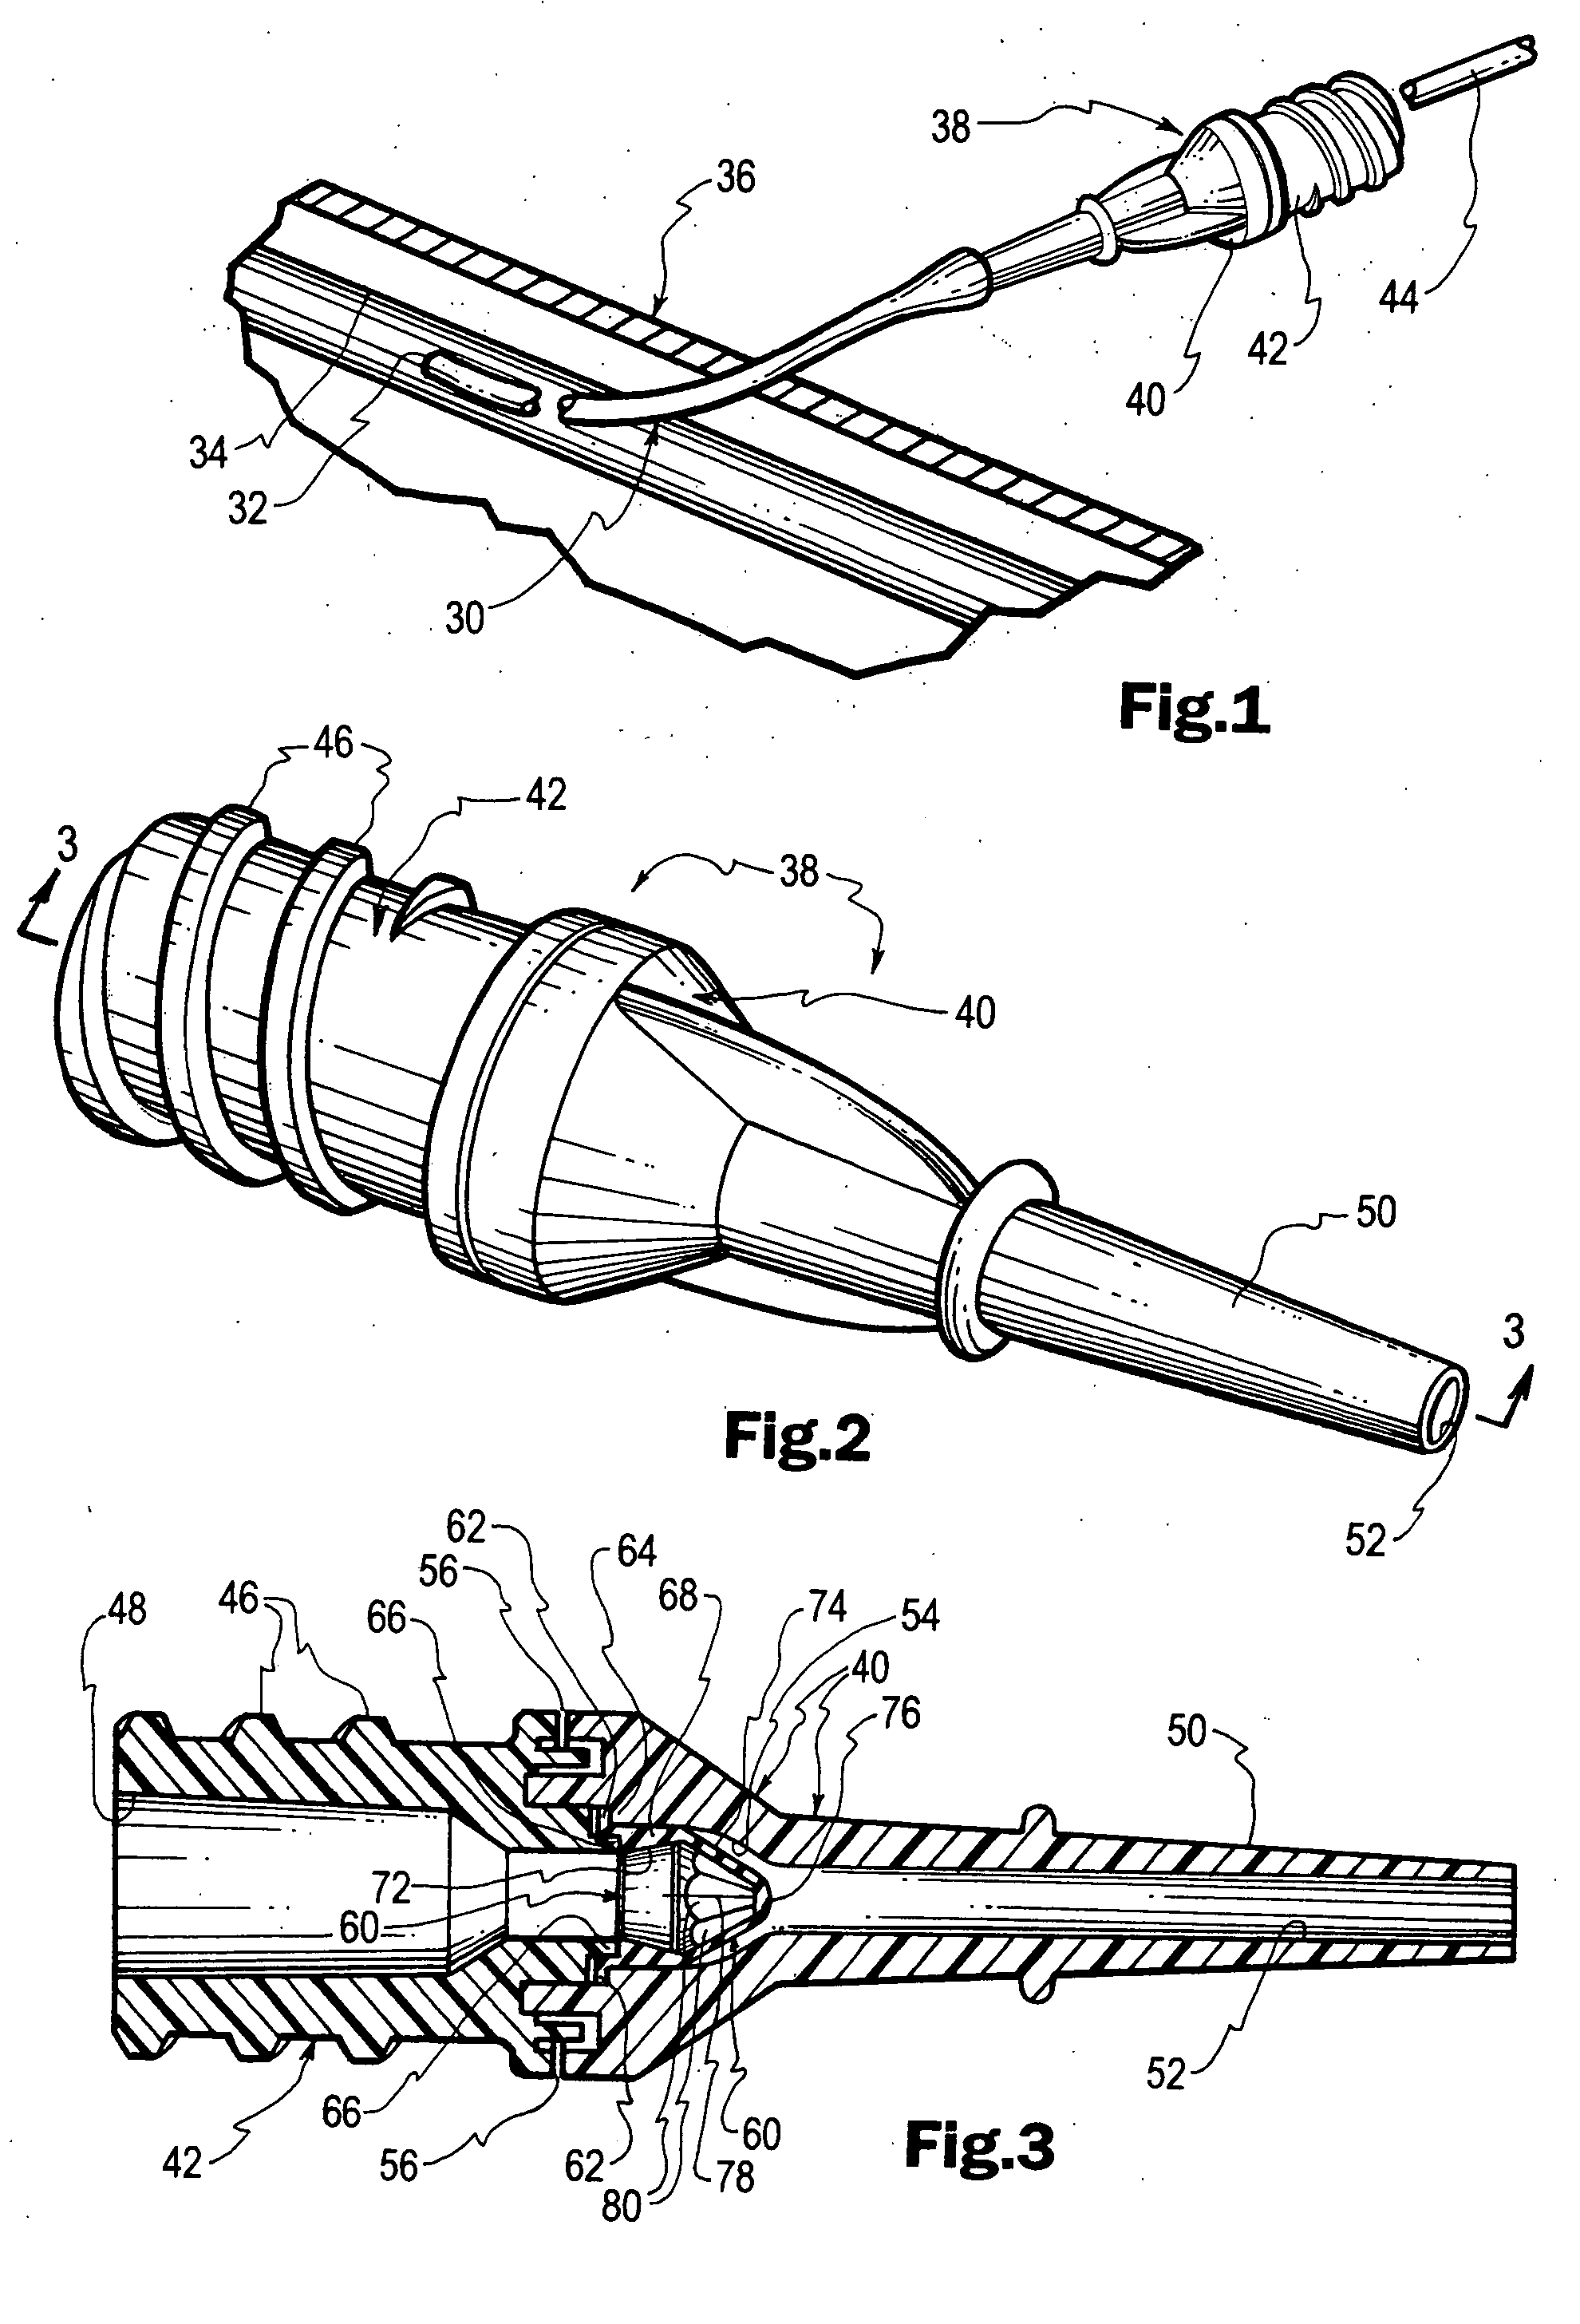 Outdwelling slit valves and assemblies for medical liquid flow through a cannula and related methods